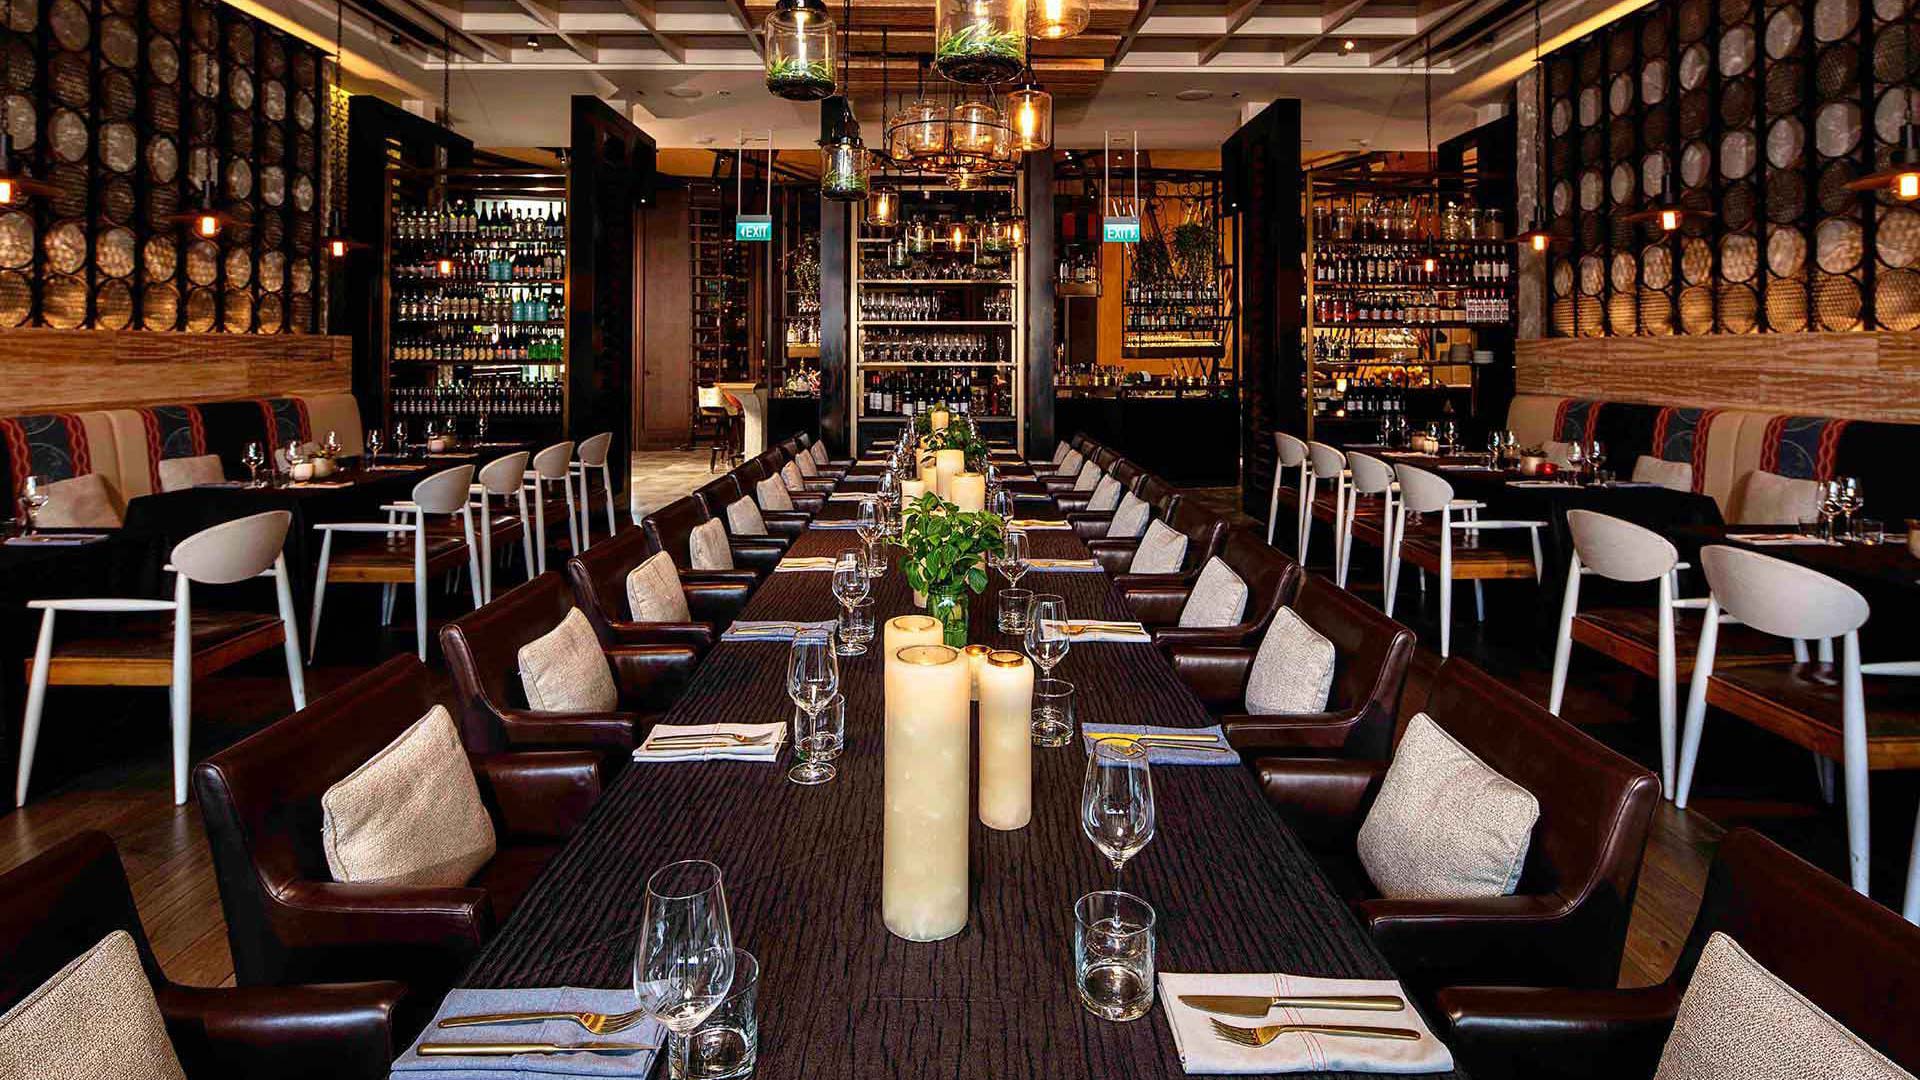 Table and dining setting for restaurants holding private dining and events in Singapore